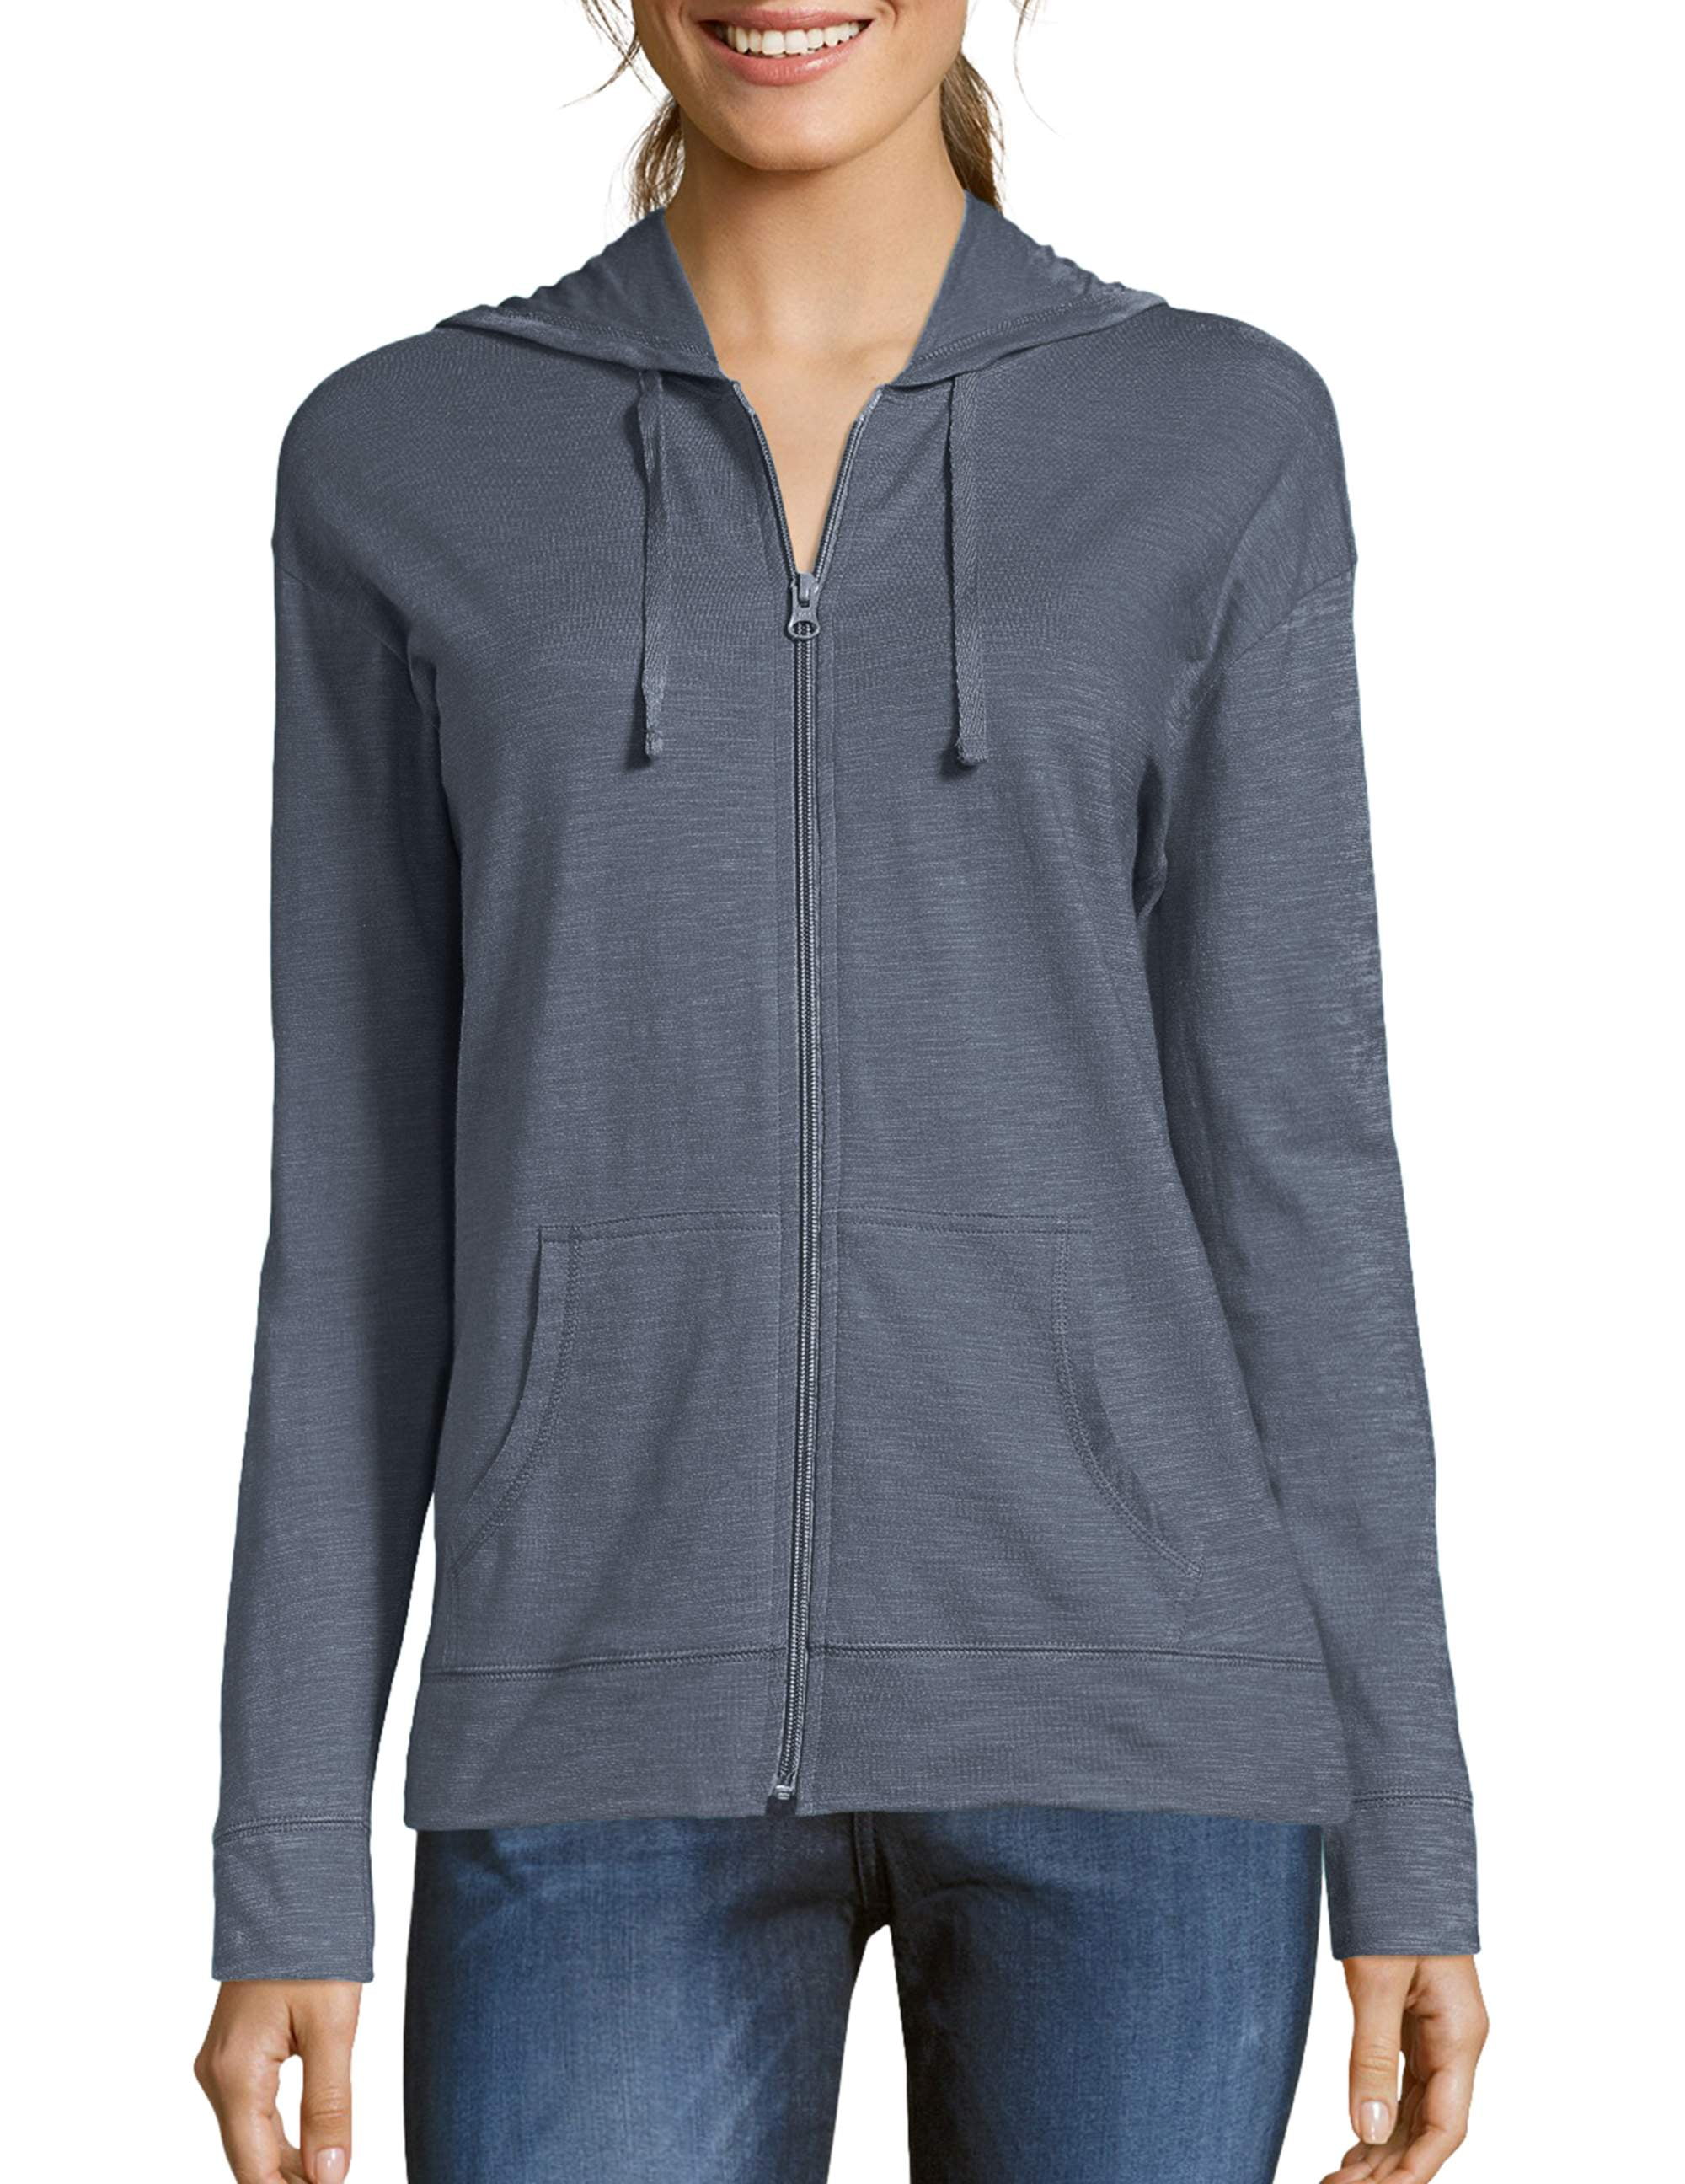 NEW Details about   Womens Hanes Gray Full Zip Hoodie NWT 2XL 